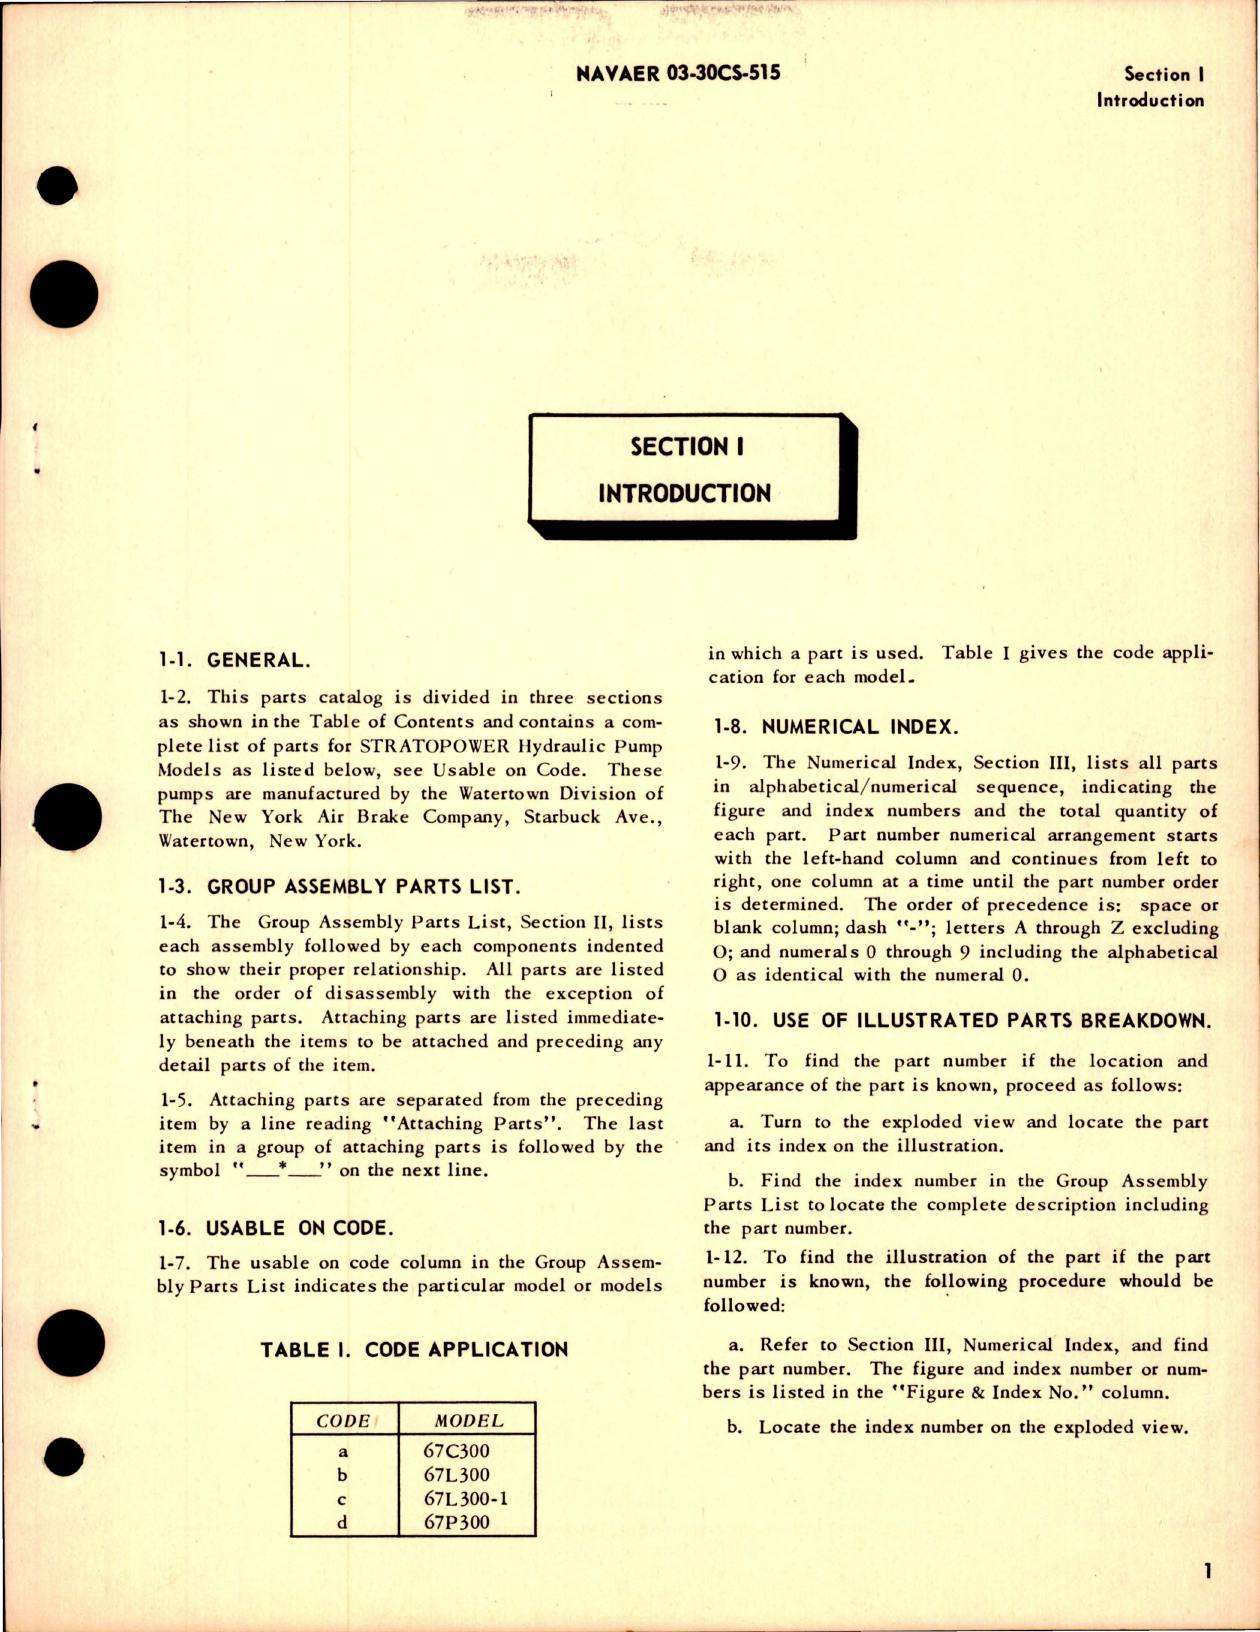 Sample page 5 from AirCorps Library document: Parts Breakdown for Stratopower Hydraulic Pump - Model 67 Constant Series 